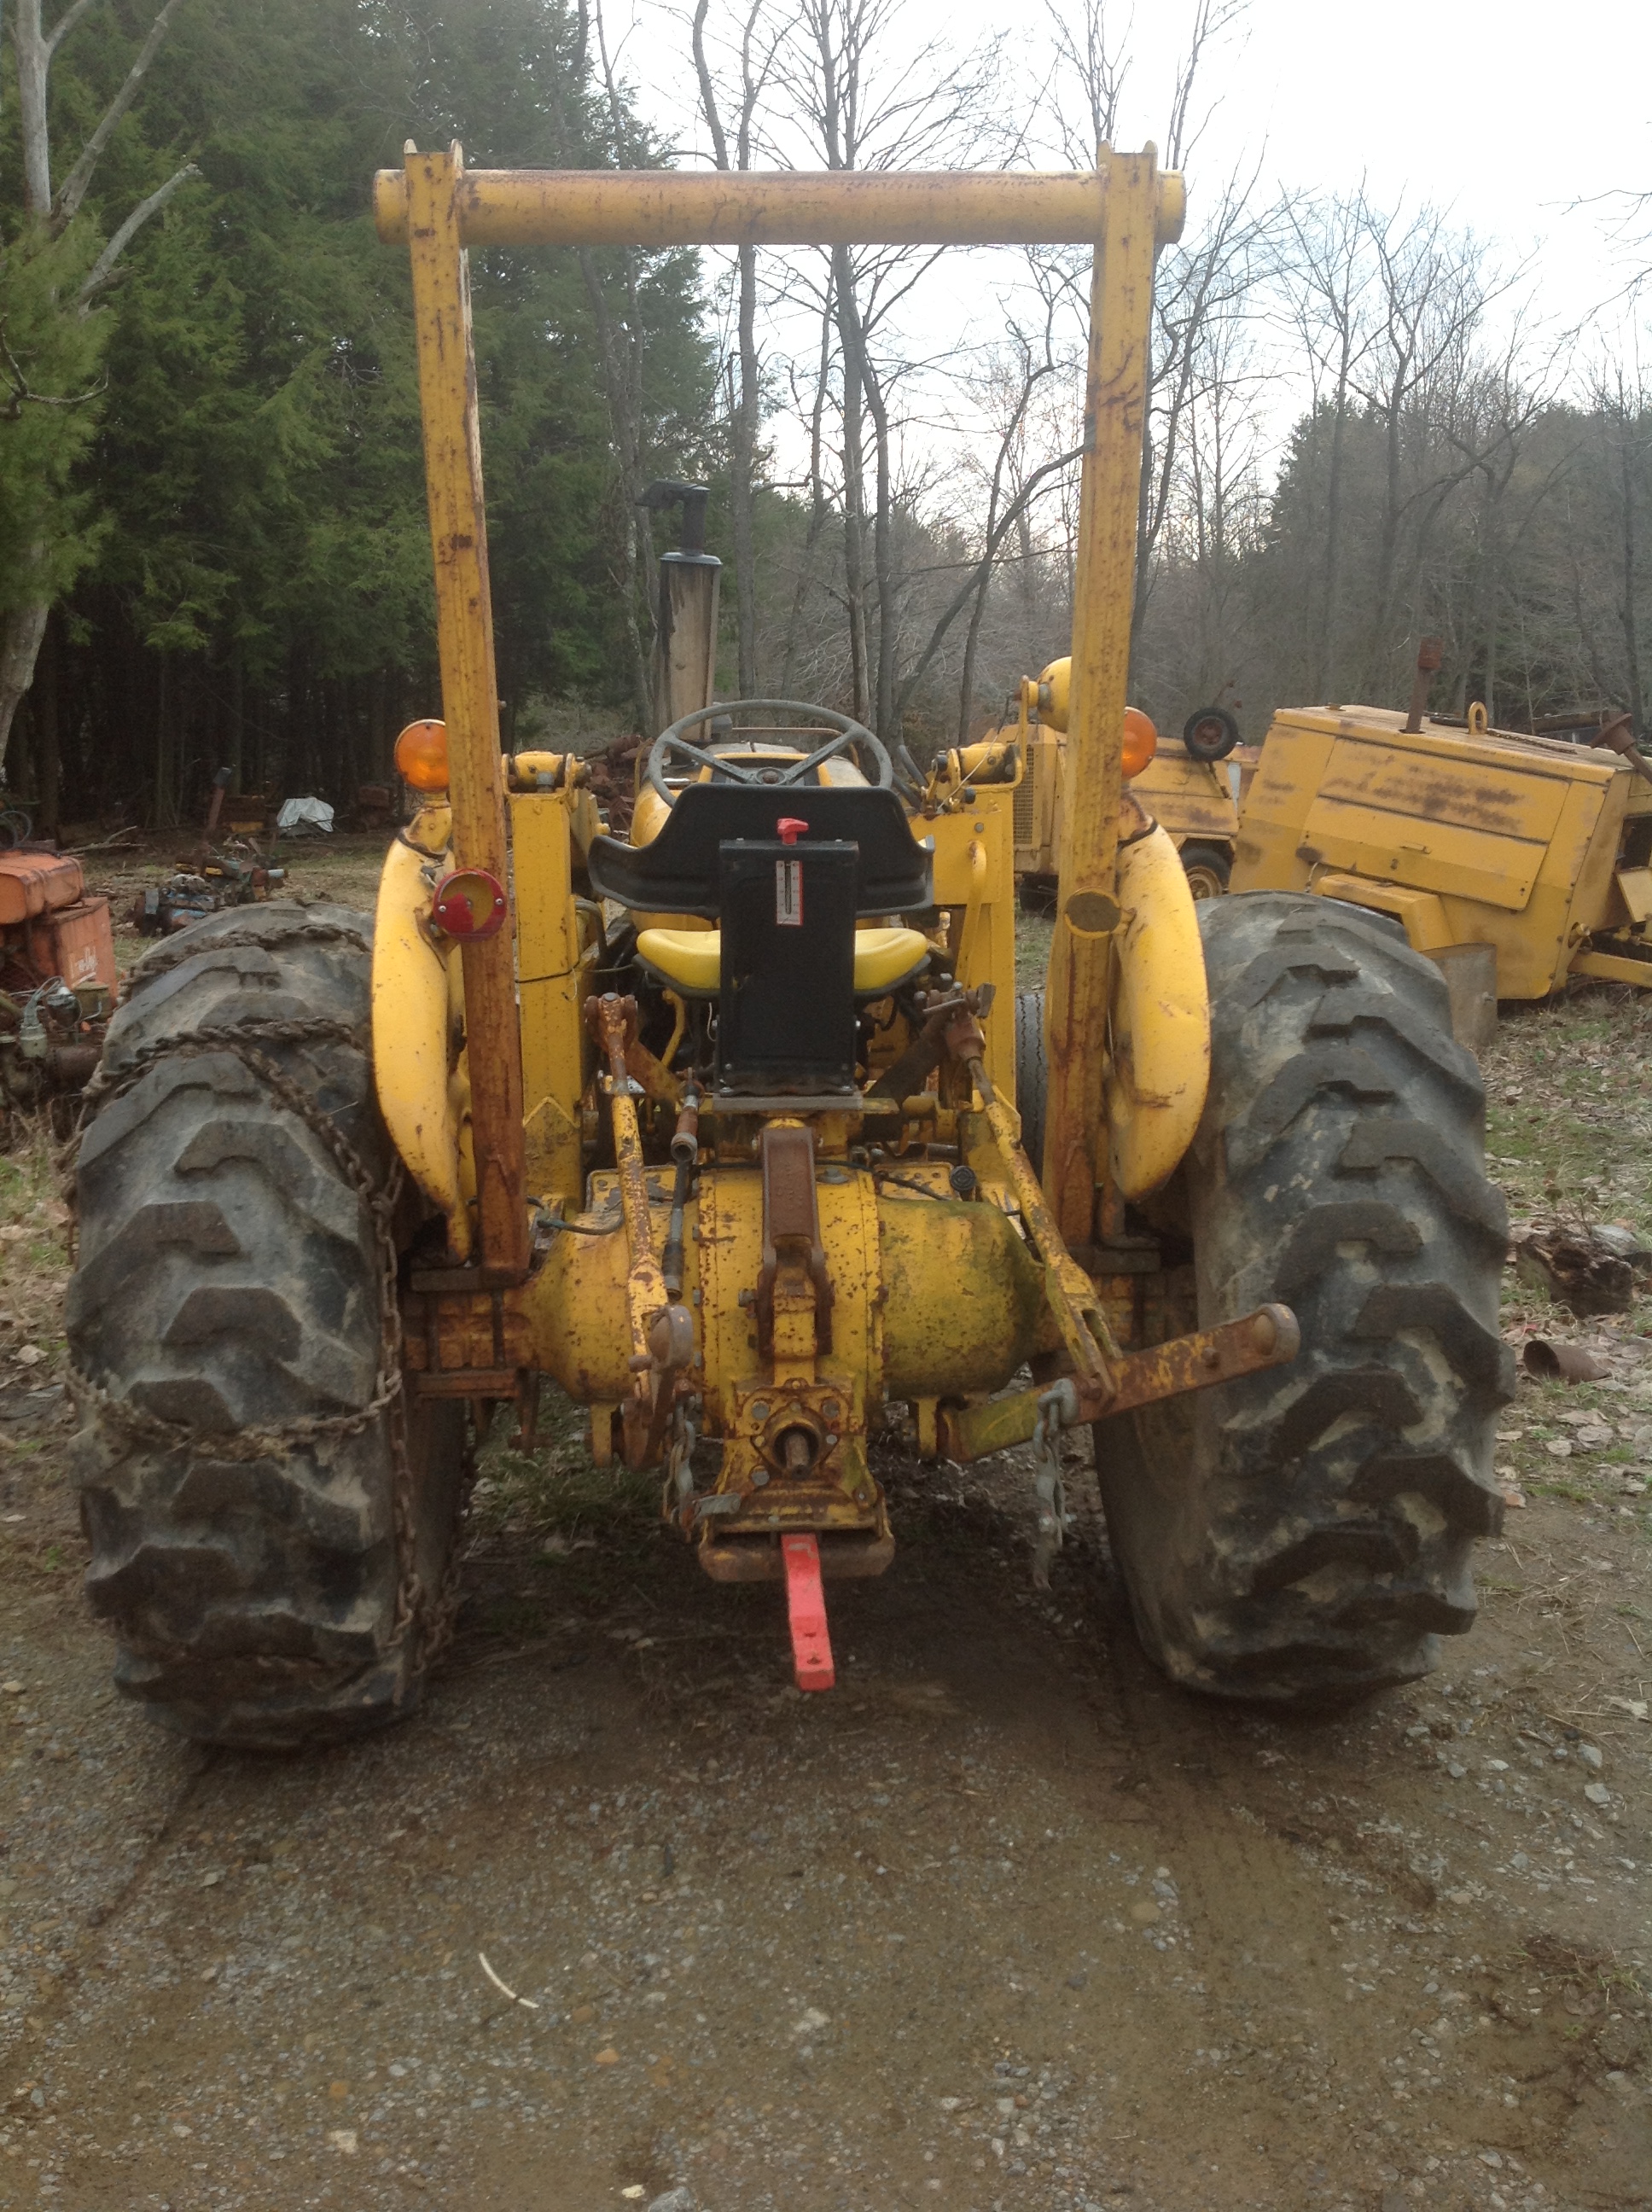 Ford model 515 industrial tractor with loader, diesel engines-smokes ...